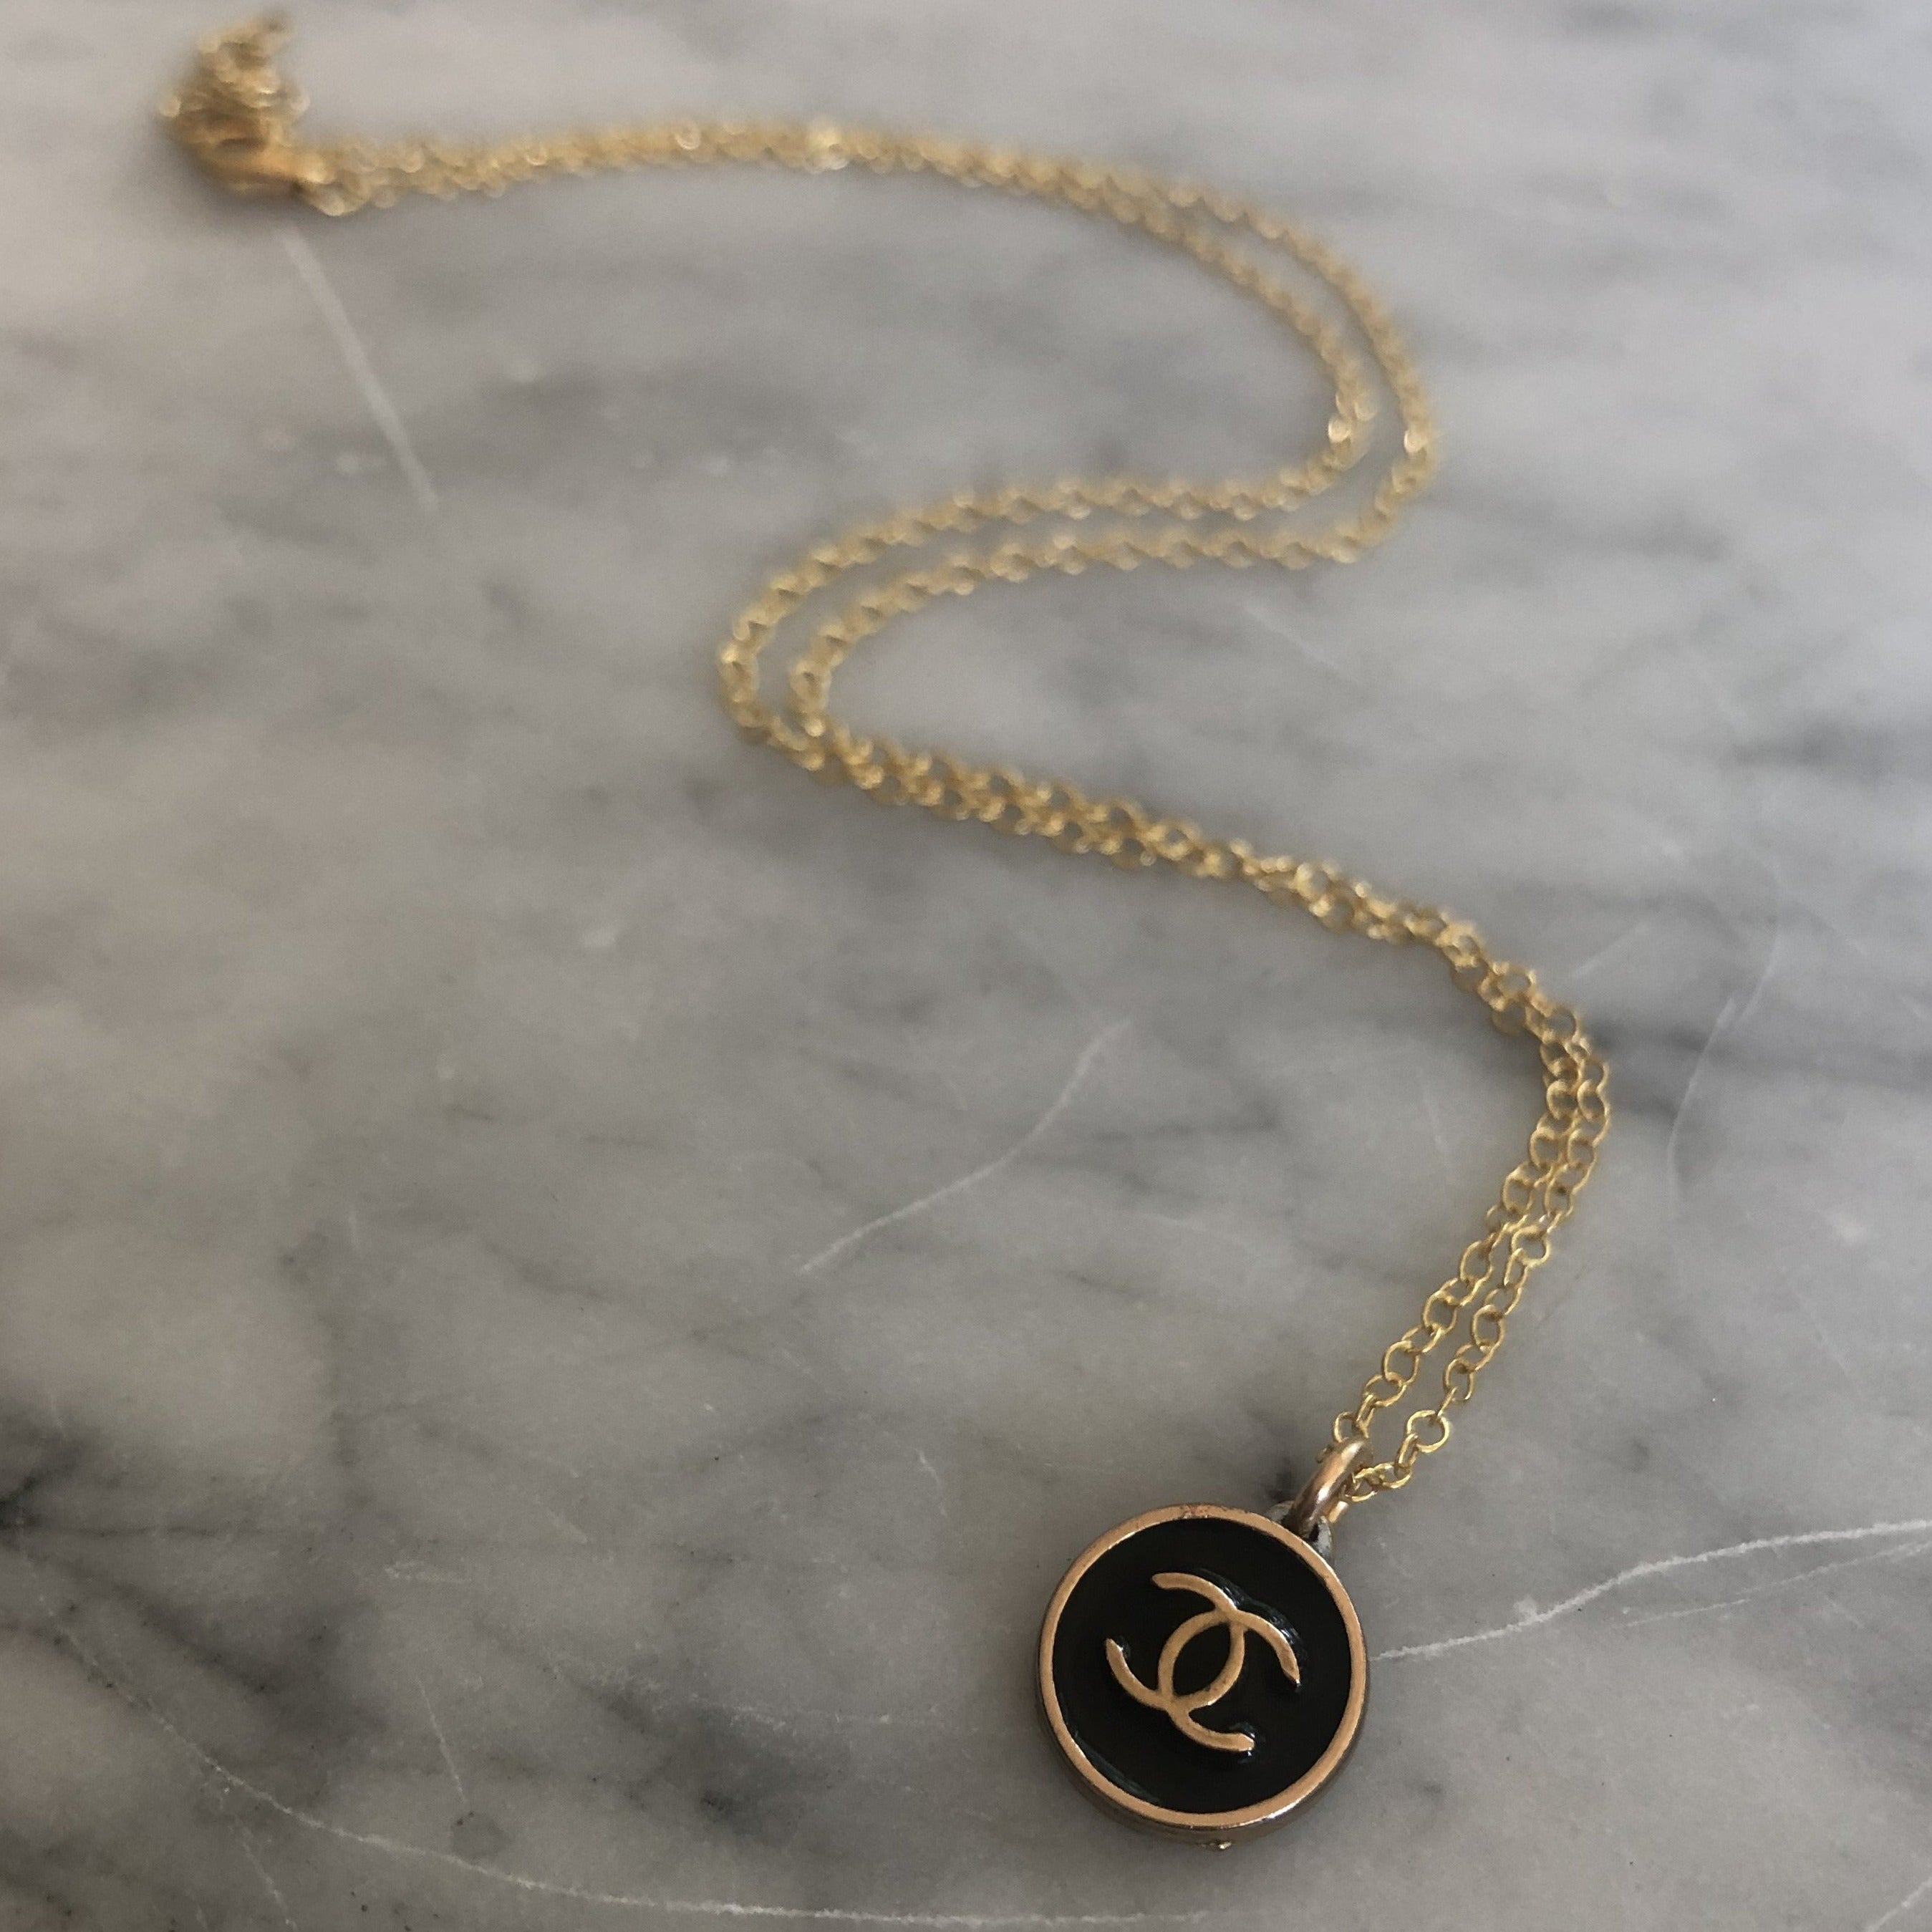 Tiny & Elegant Vintage Black and Gold Chanel Button Necklace